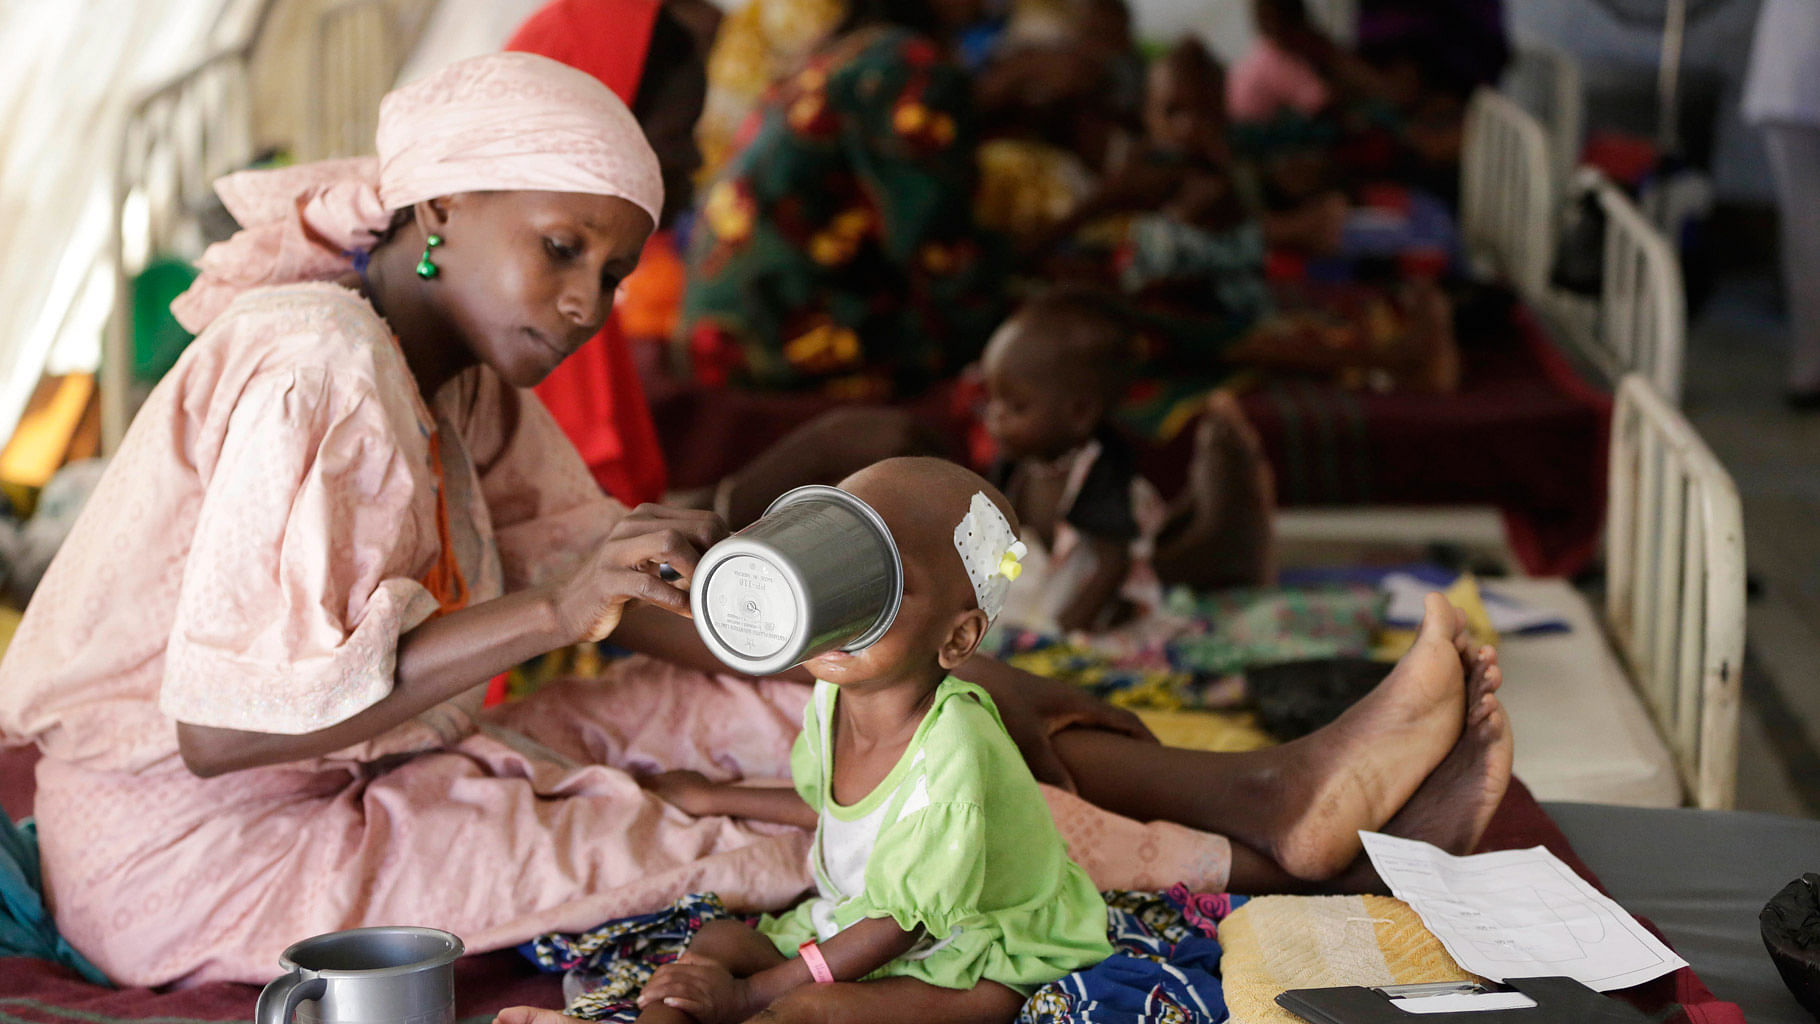 A mother feeds her malnourished child at a feeding centre run by Doctors Without Borders in Maiduguri Nigeria, Monday 29 August, 2016. (Photo: AP)